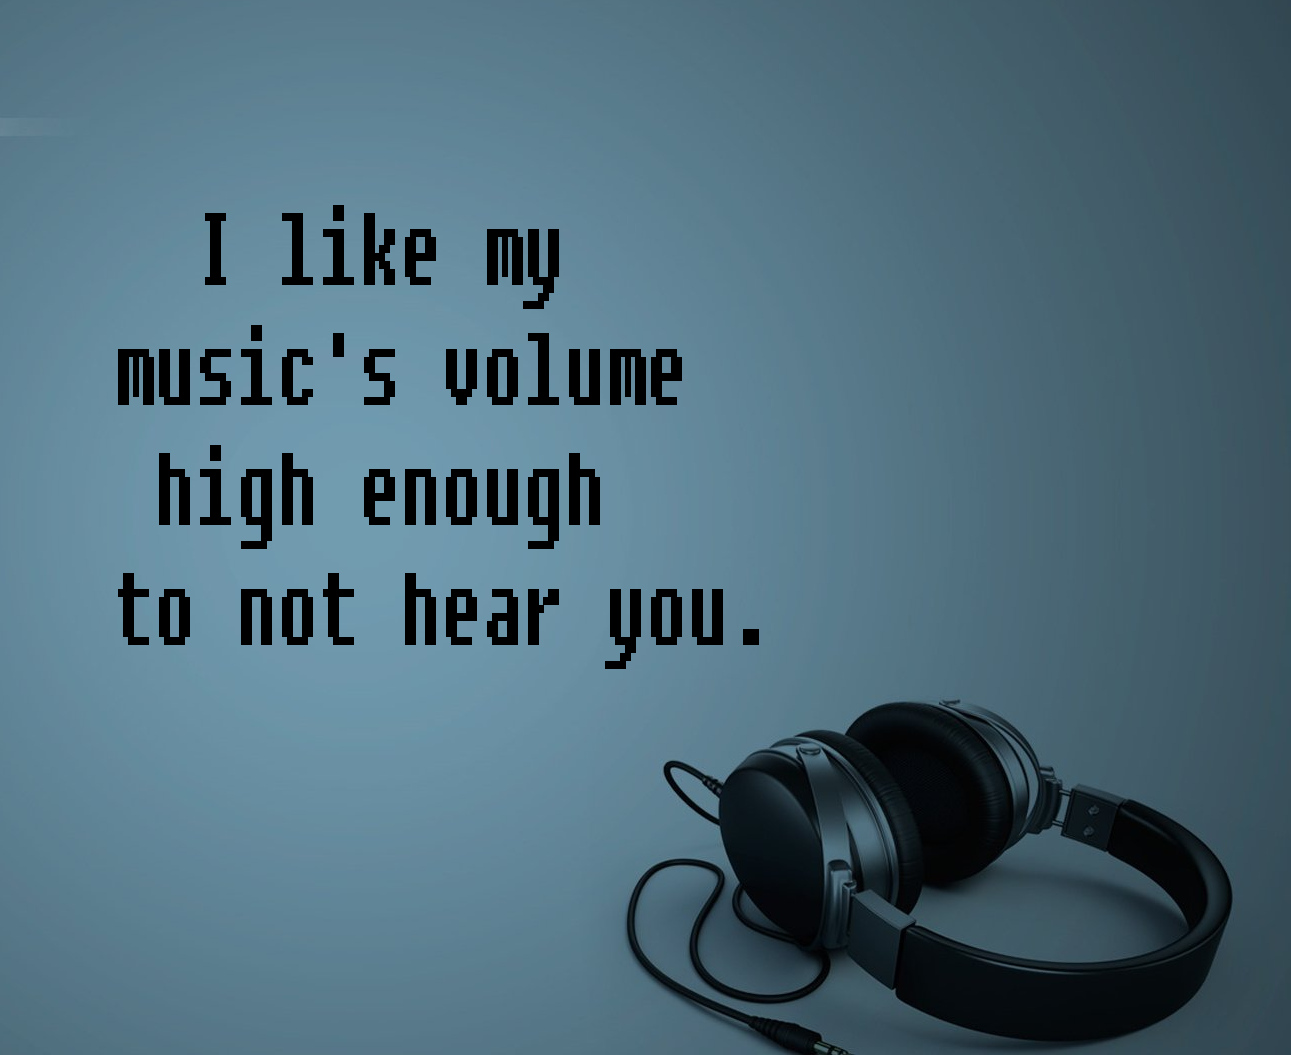 I like my music's volume high enough to not hear you